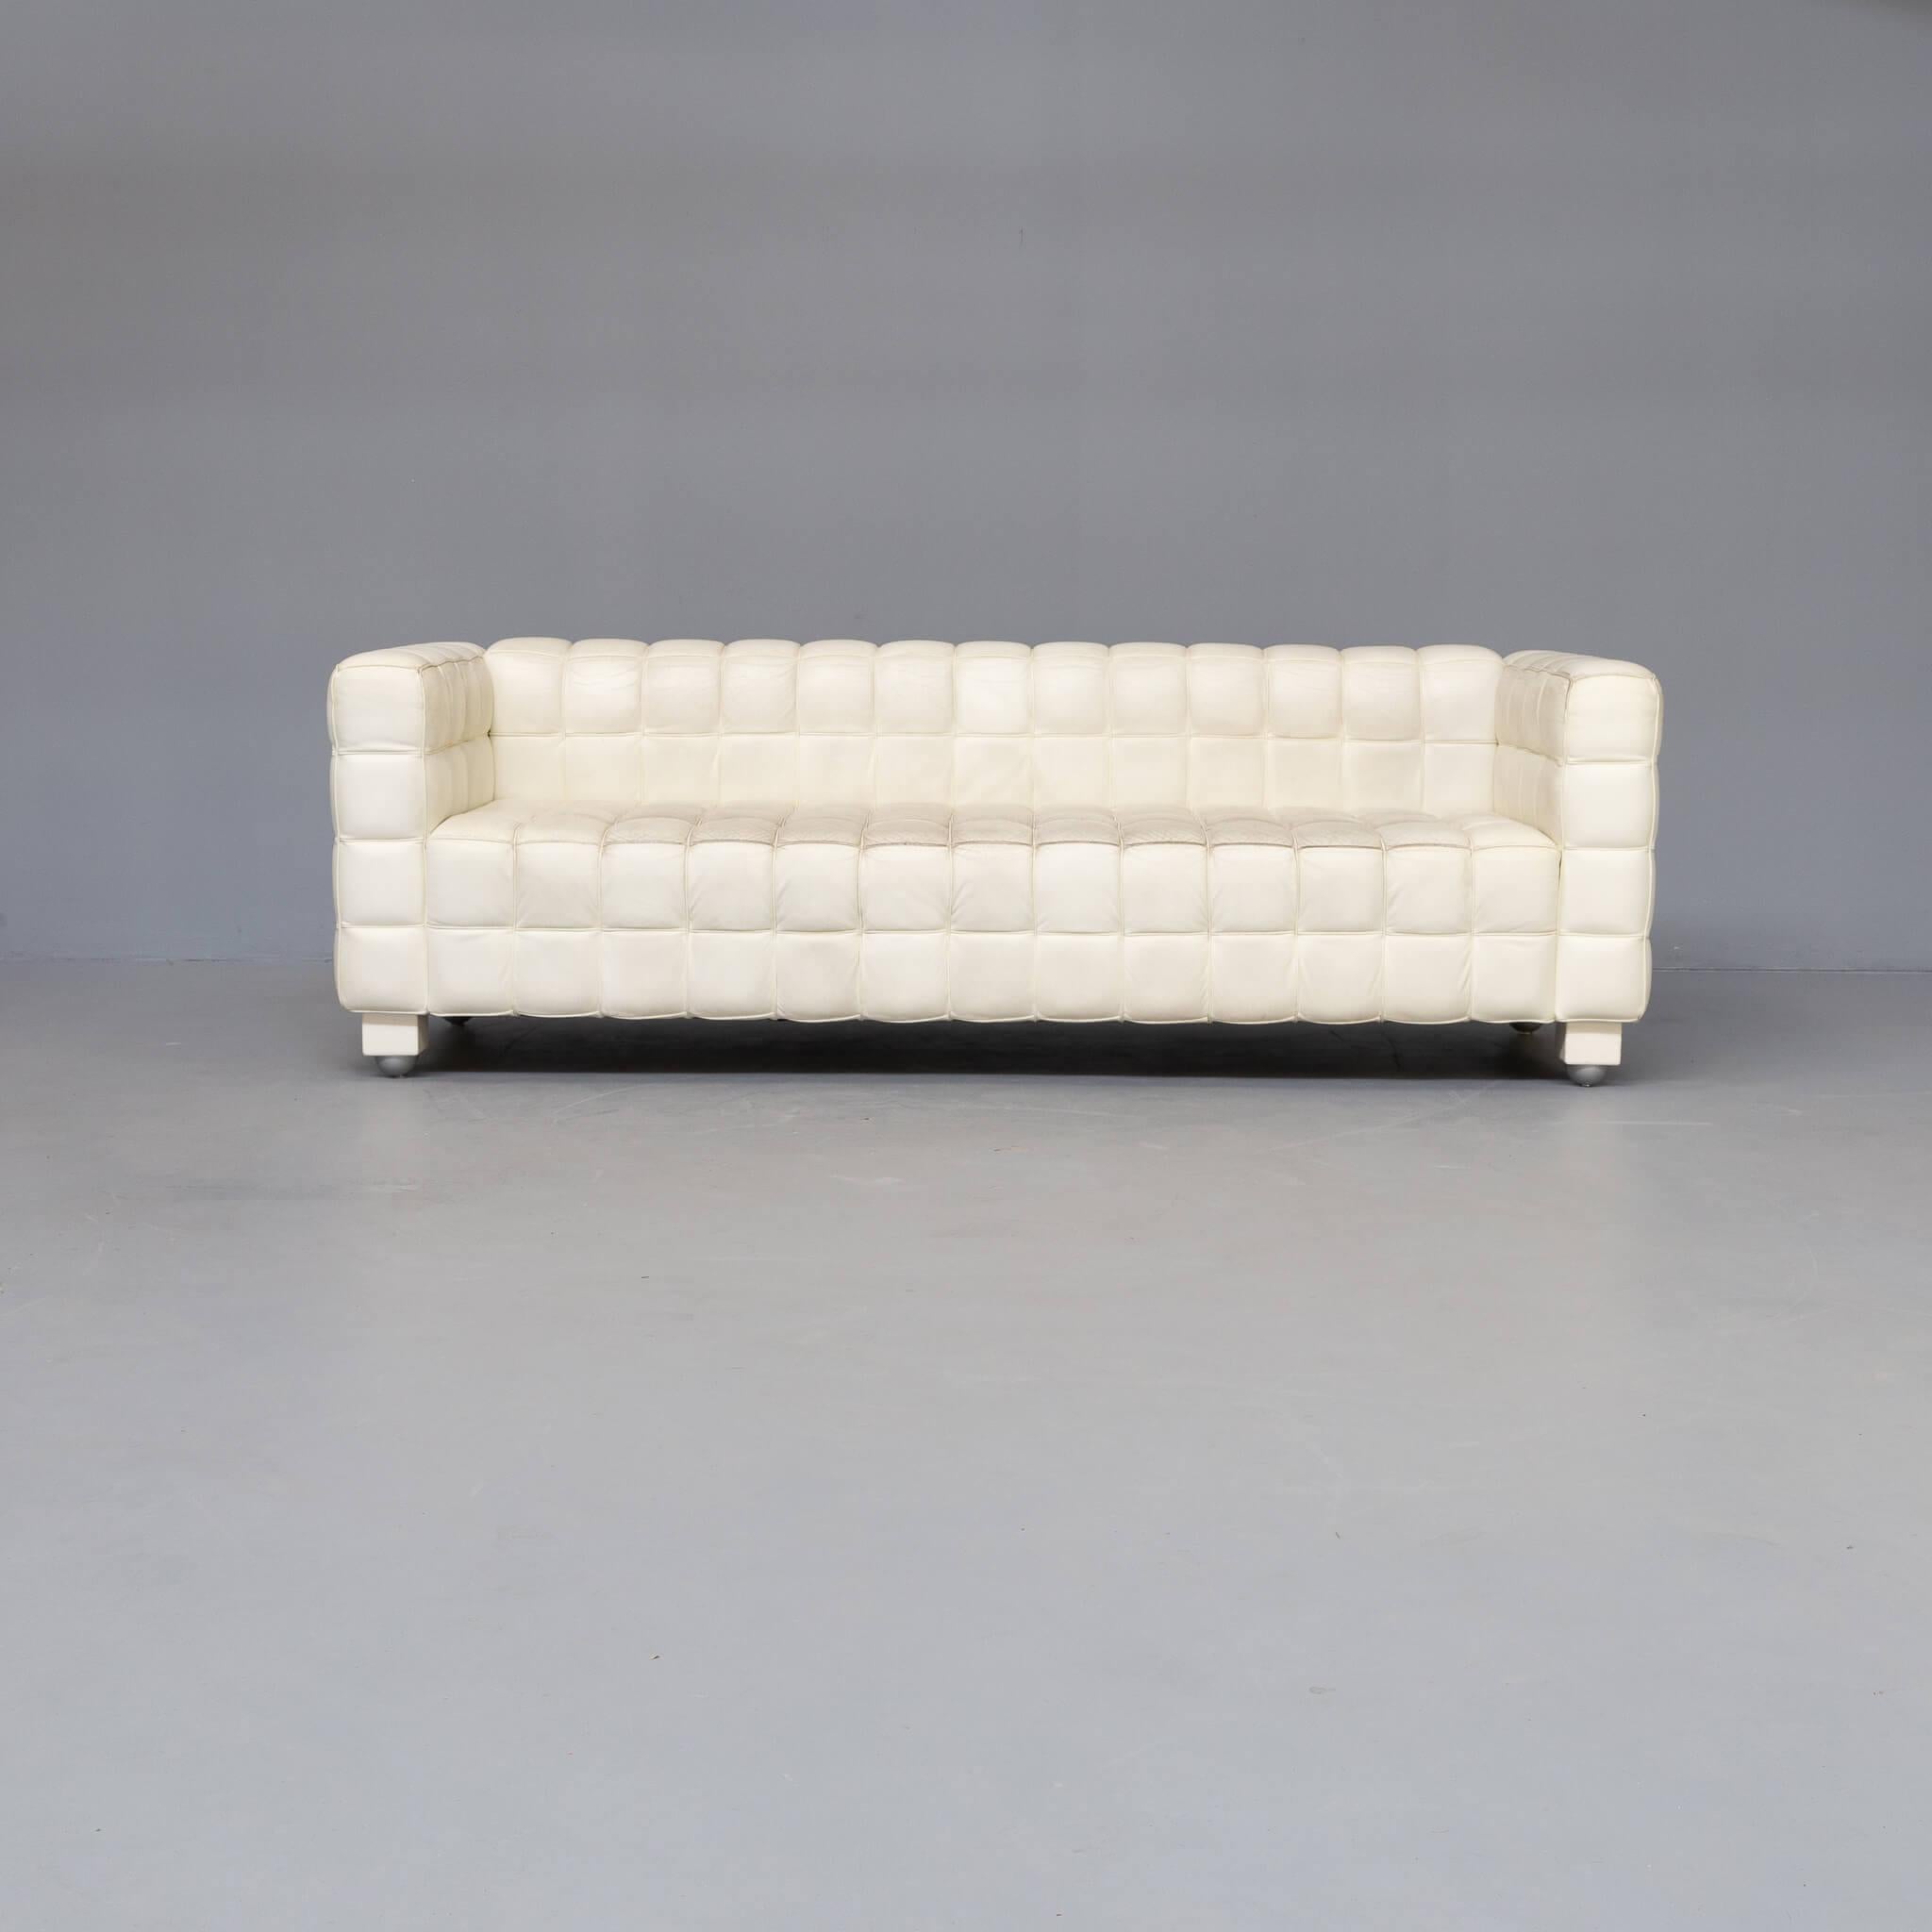 Josef Hoffmann designed the ‘Kubus’ fauteuil first in 1910 completed with a sofa. The sofa can be two seat or three seat. A classic example of Hoffmann’s strict geometrical lines and the quadratic theme in his work is the Kubus, which we offer you